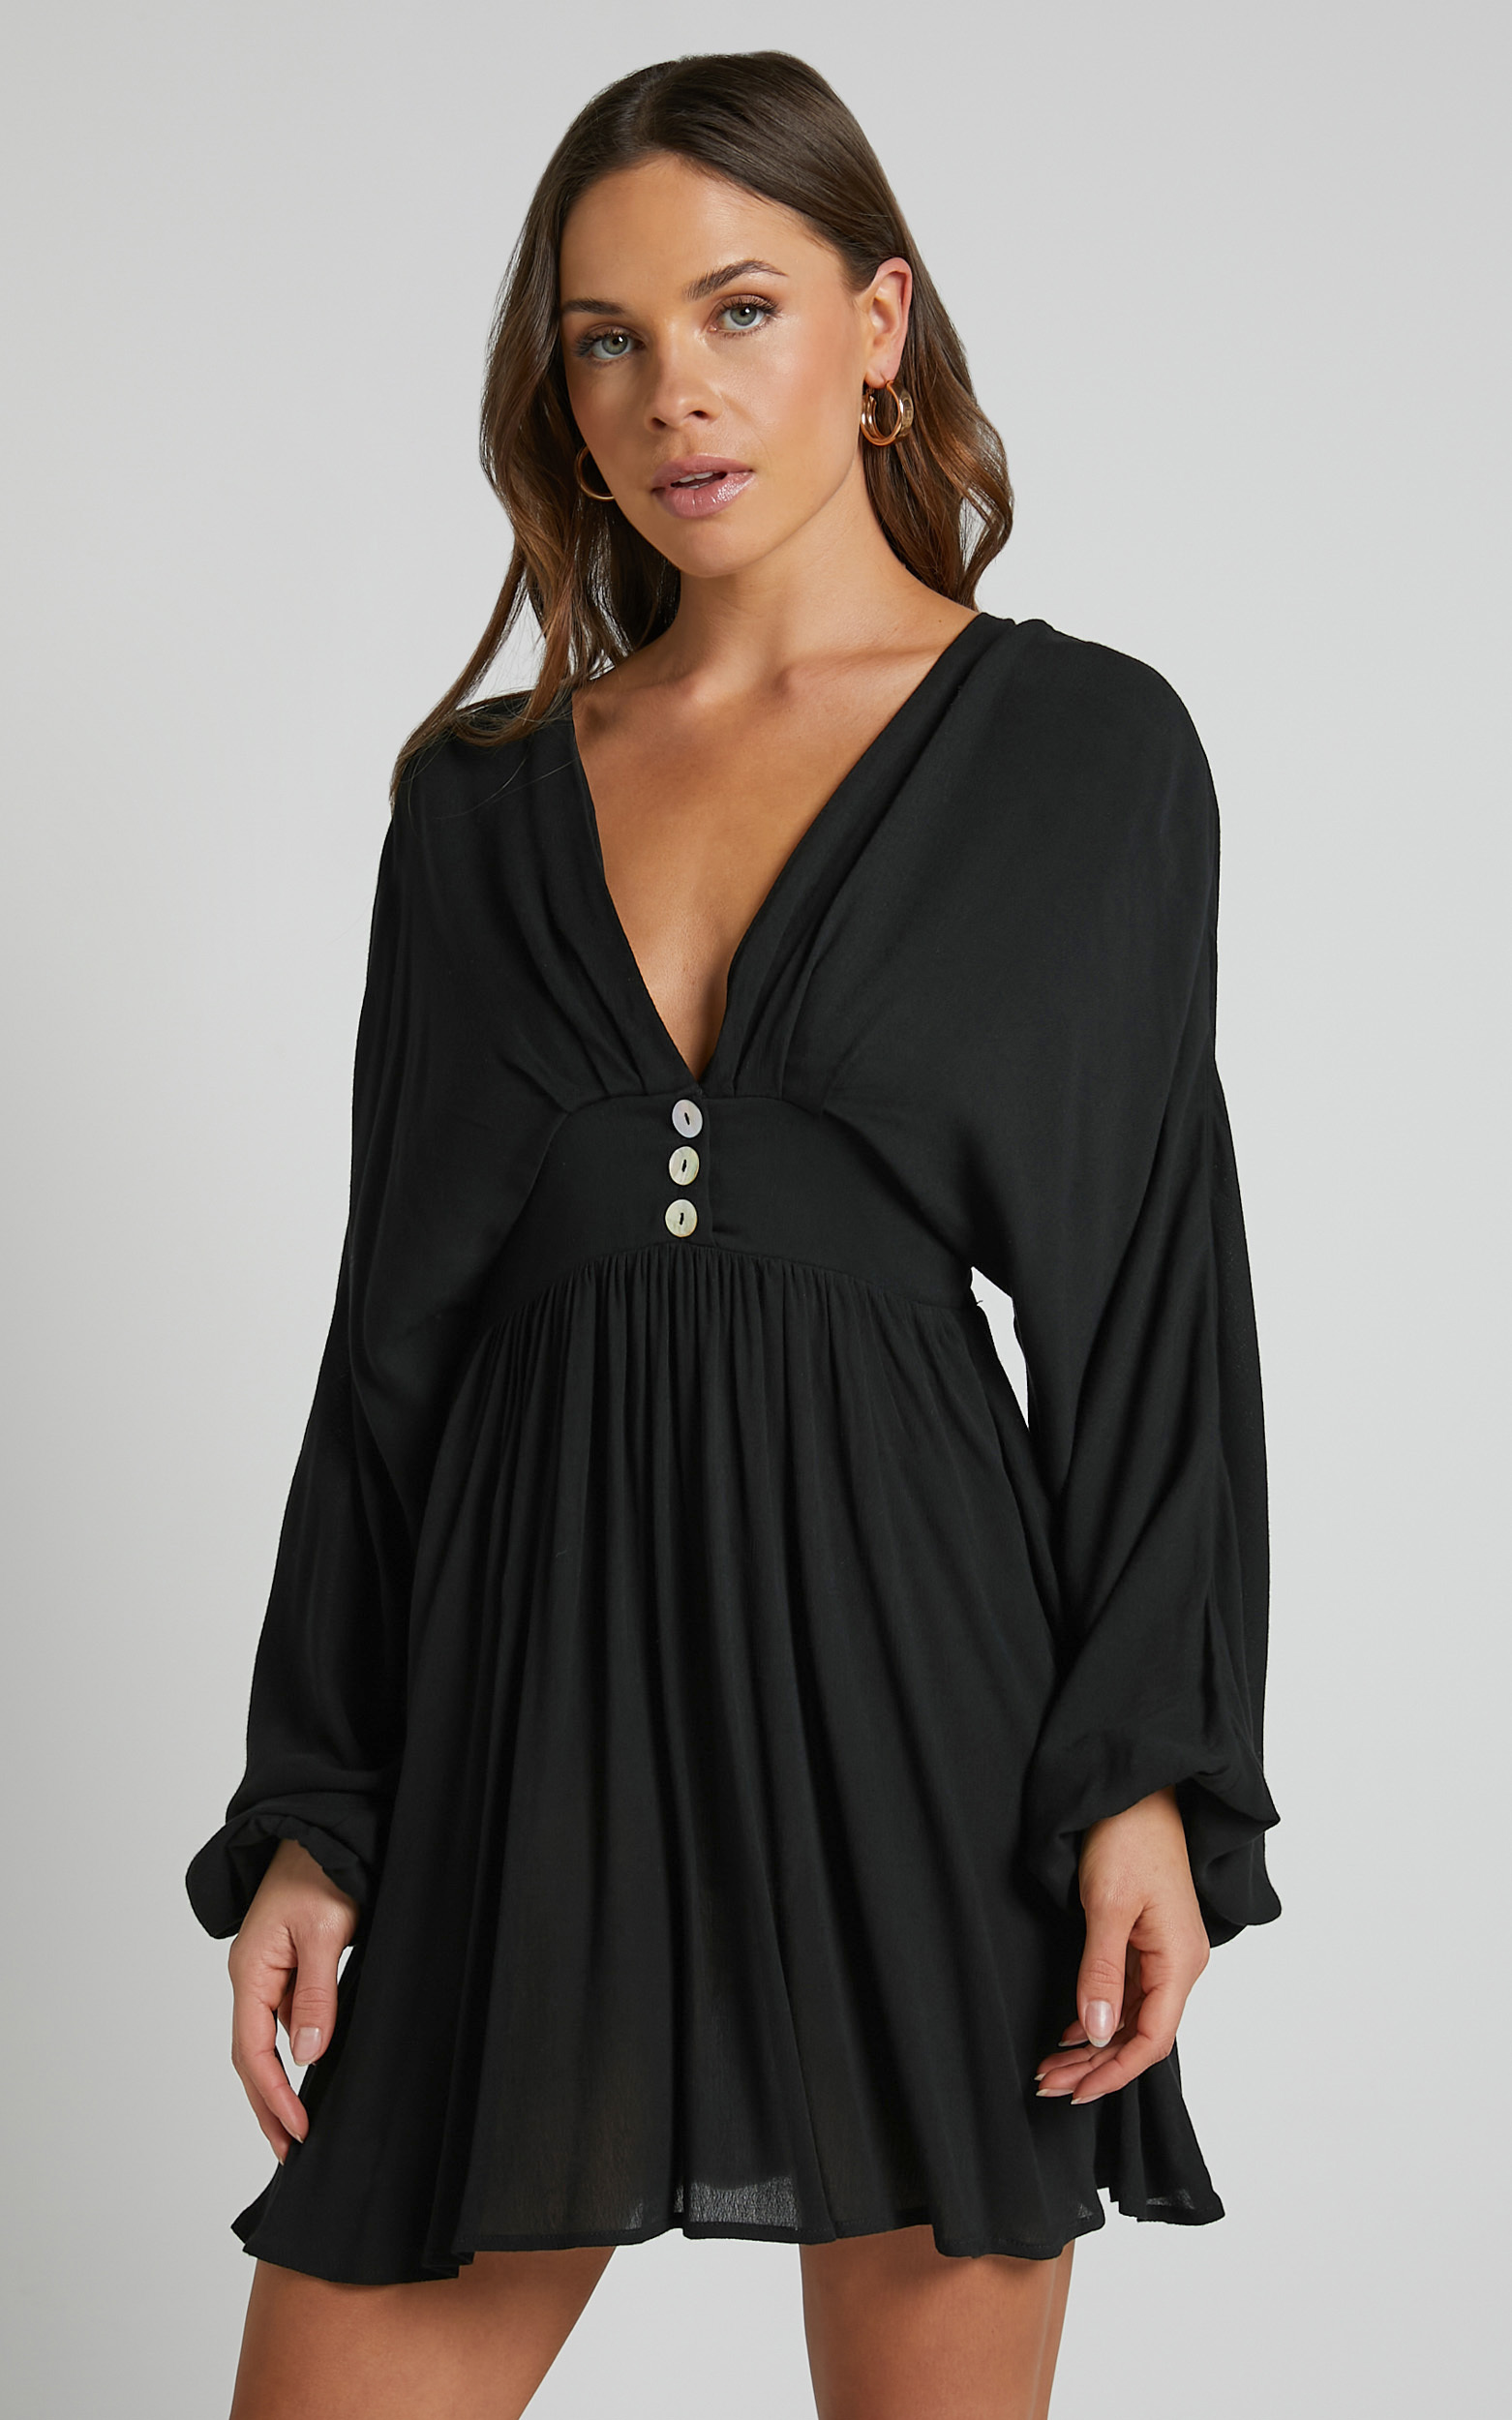 Piper Mini Dress - Long Sleeve button front in Black - 06, BLK2, hi-res image number null